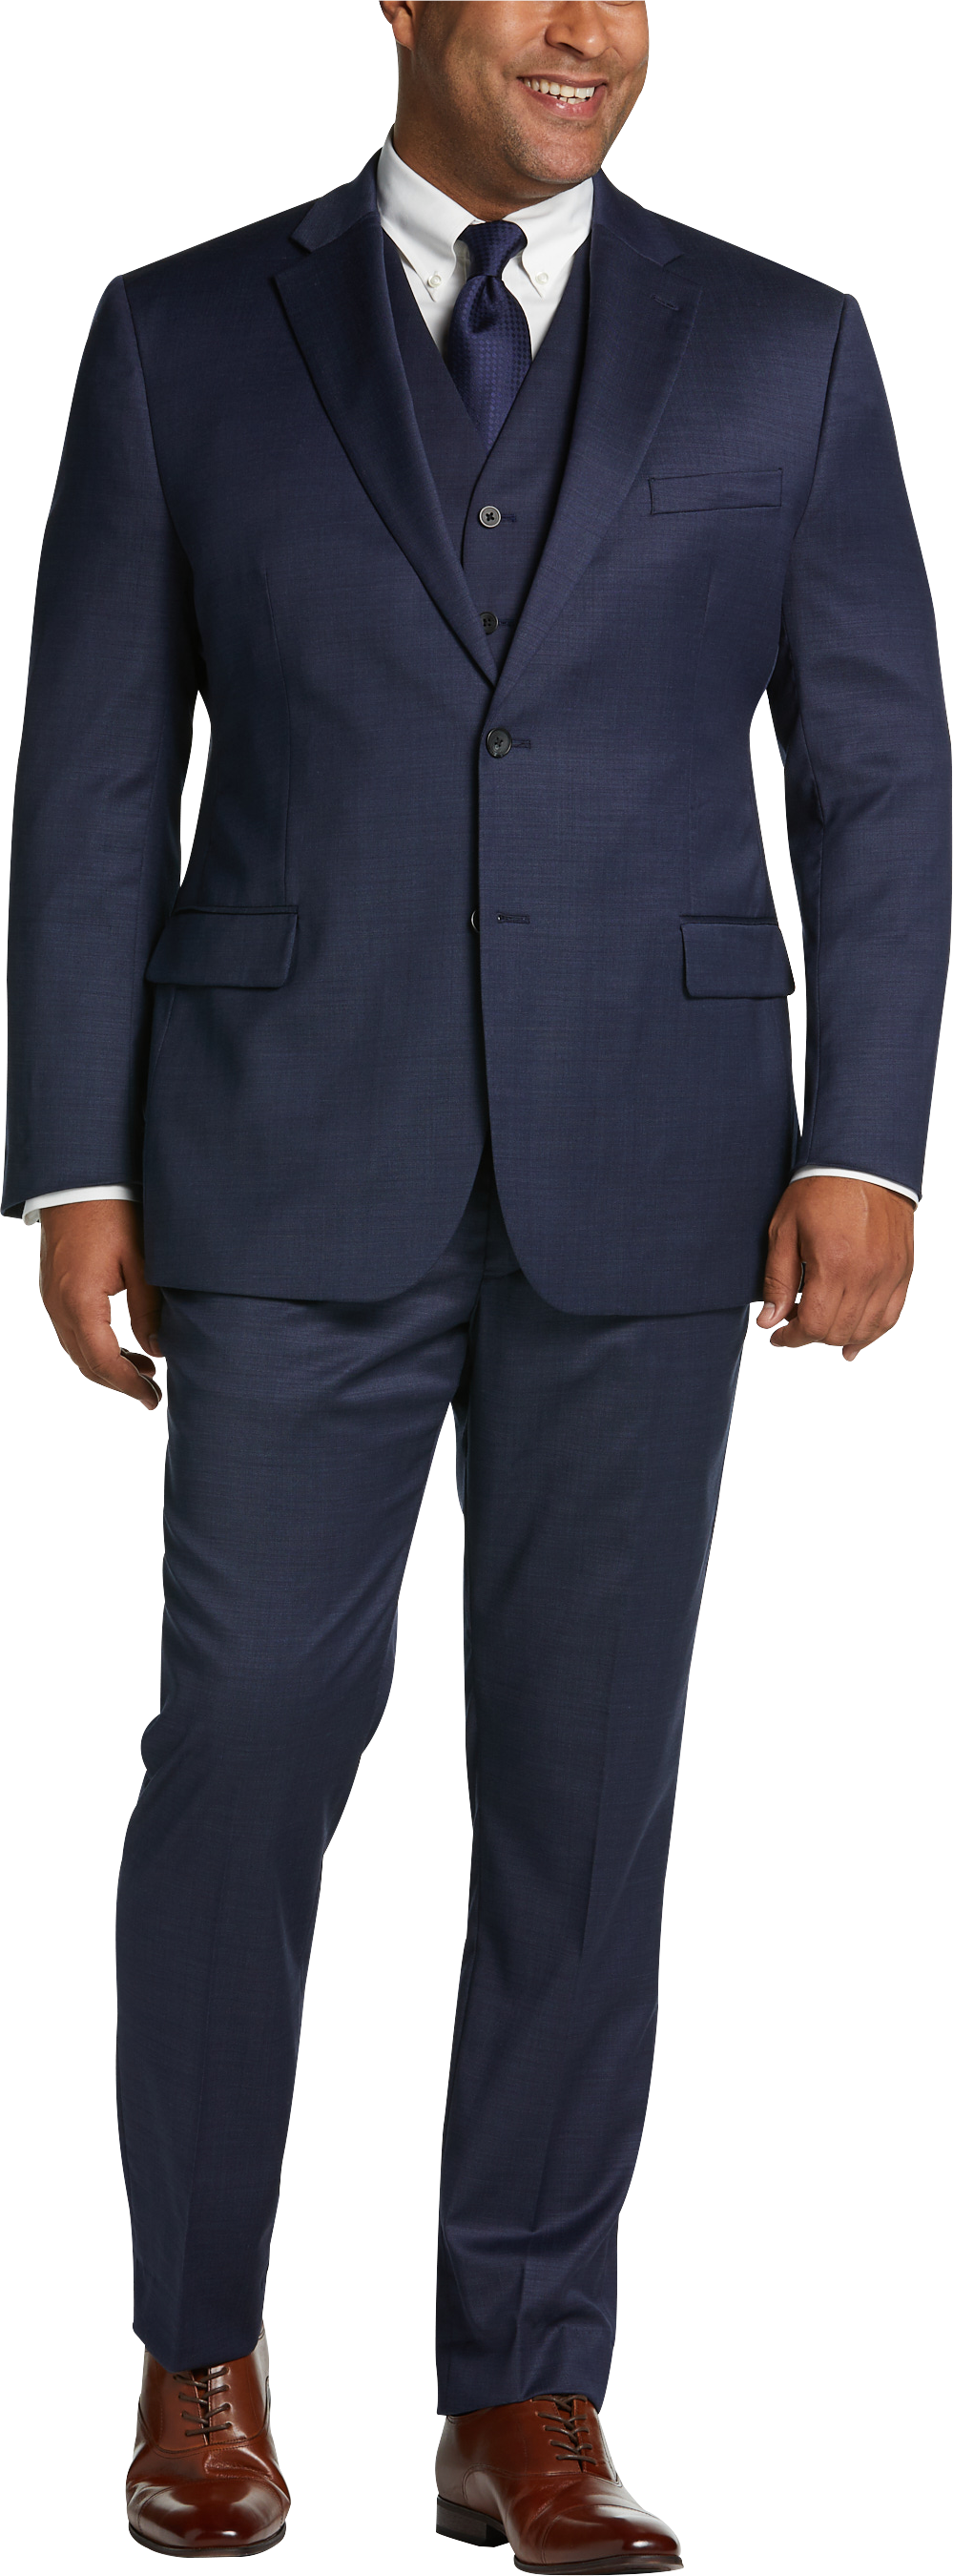 Awearness Kenneth Cole Modern Fit Suit Separates Coat, Blue